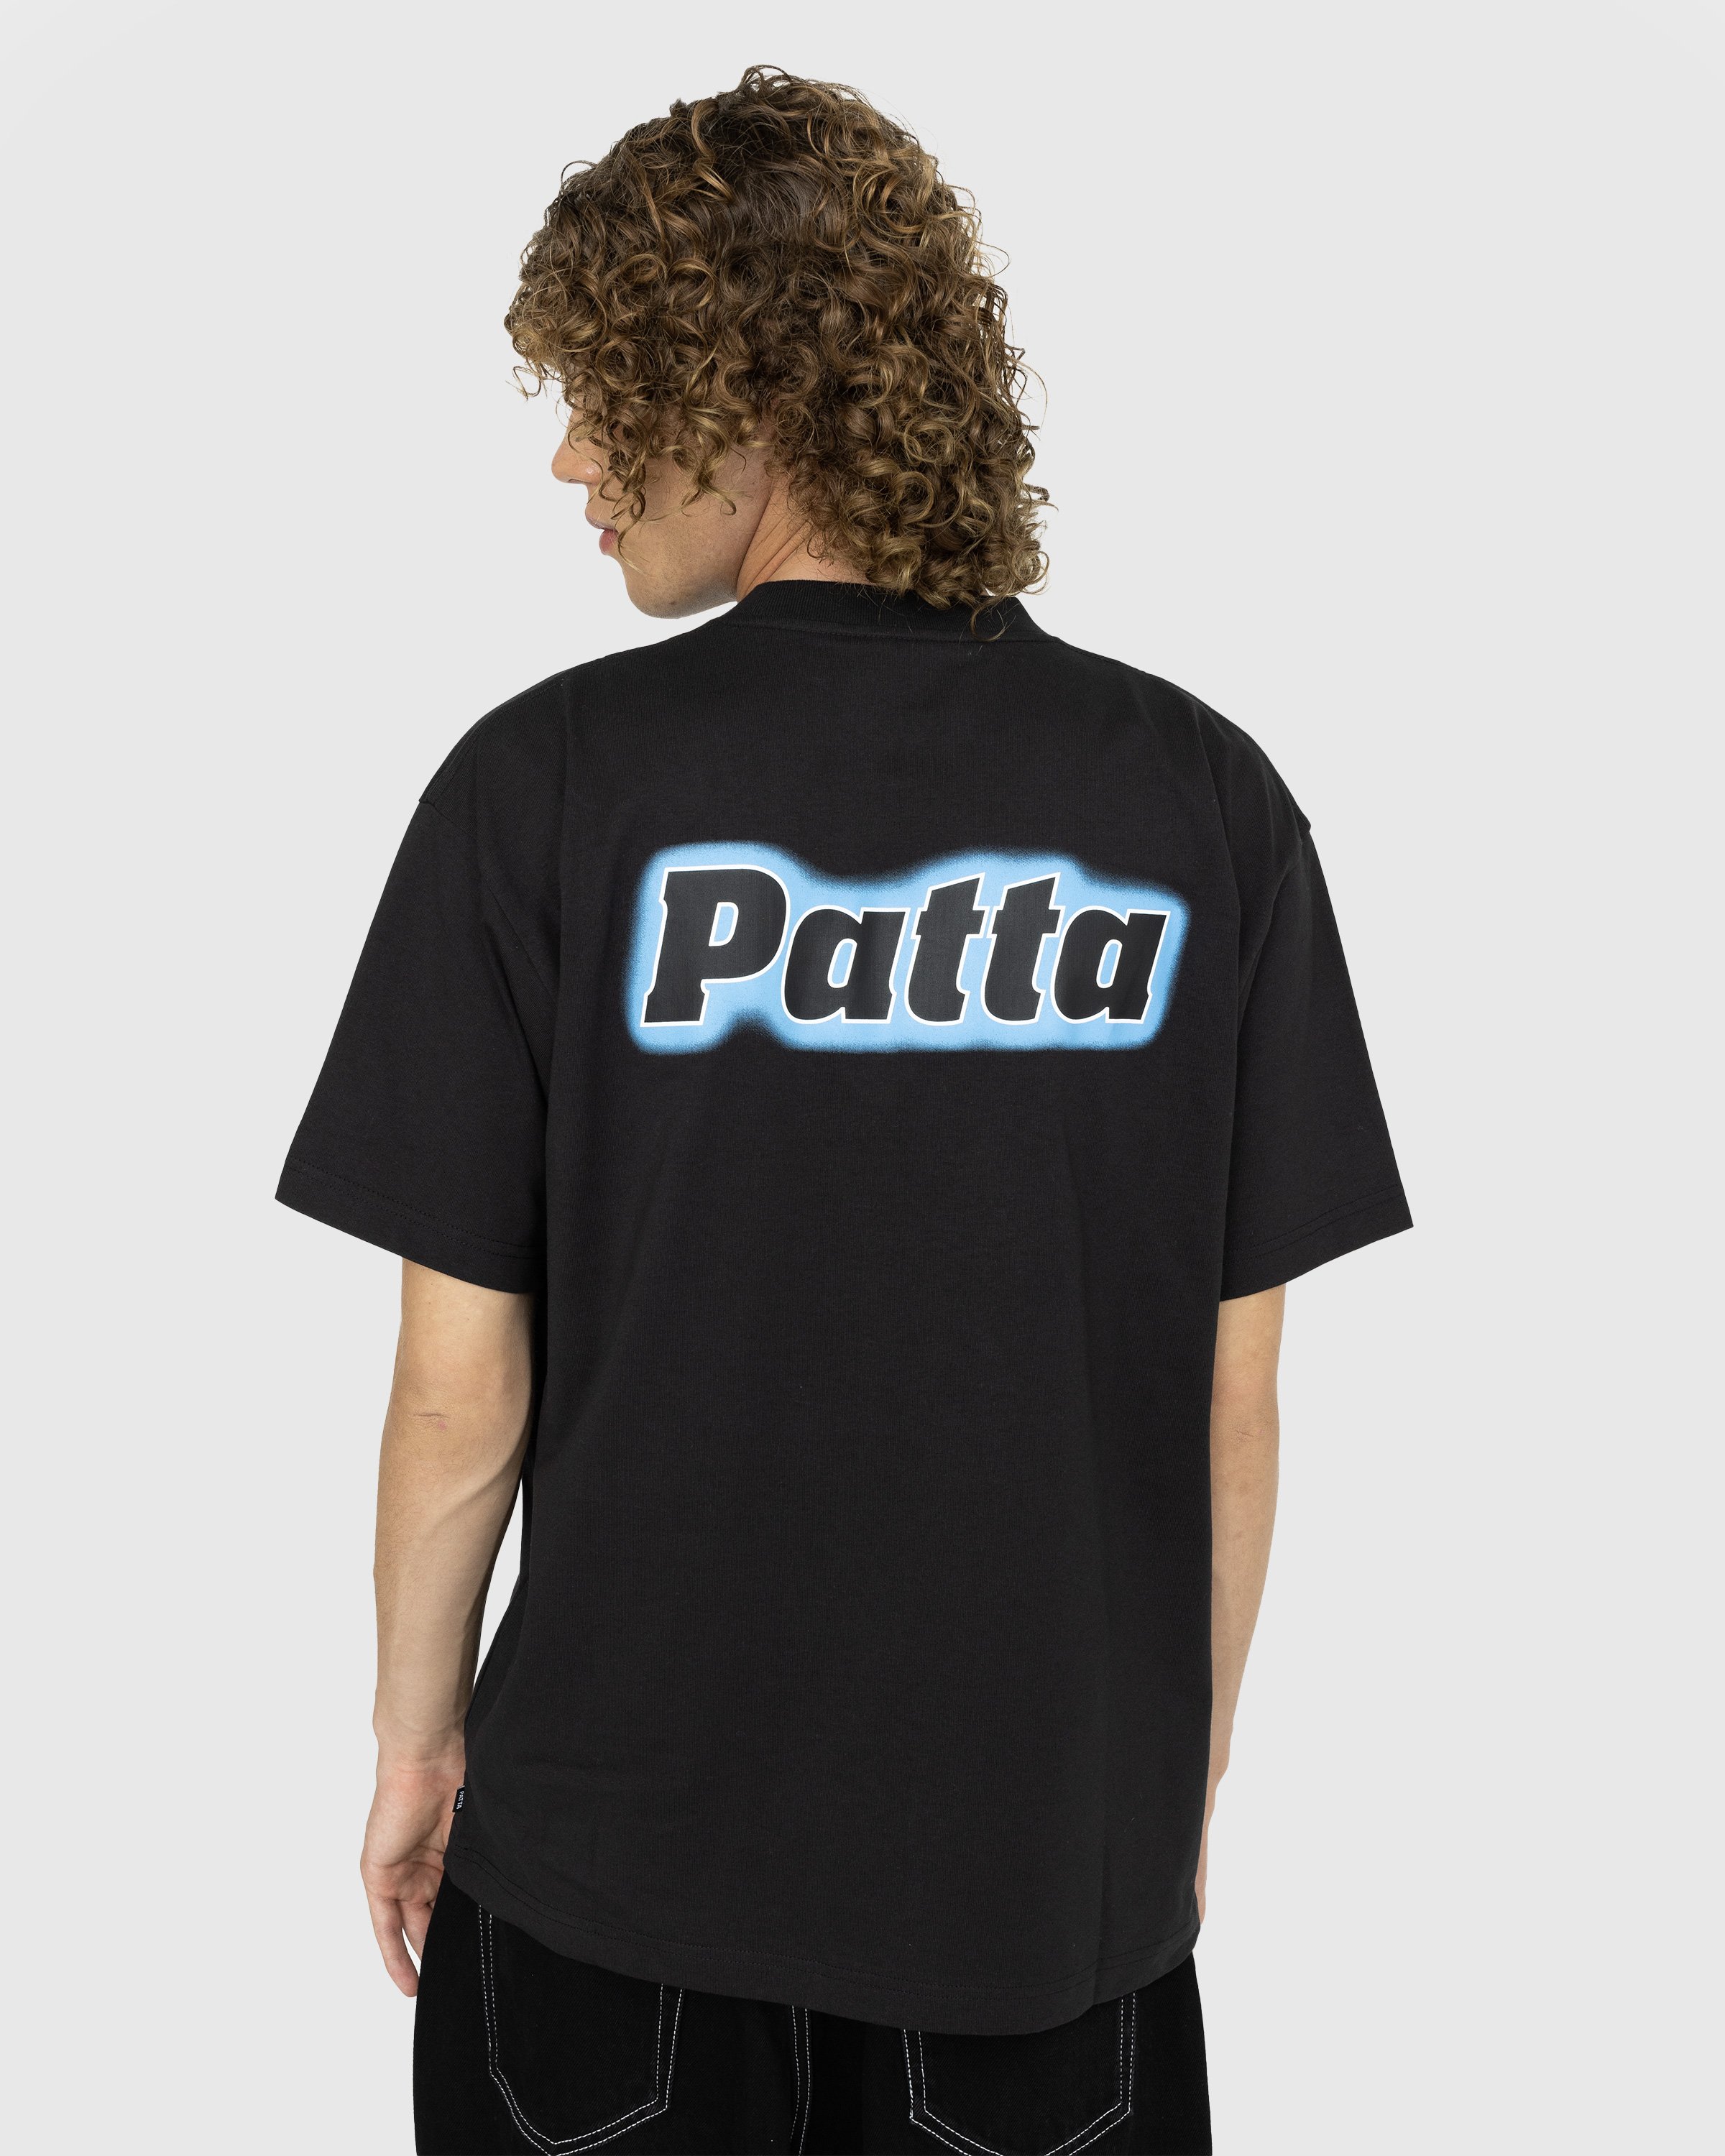 Patta - It Does Matter What You Think T-Shirt Black - Clothing - Black - Image 3